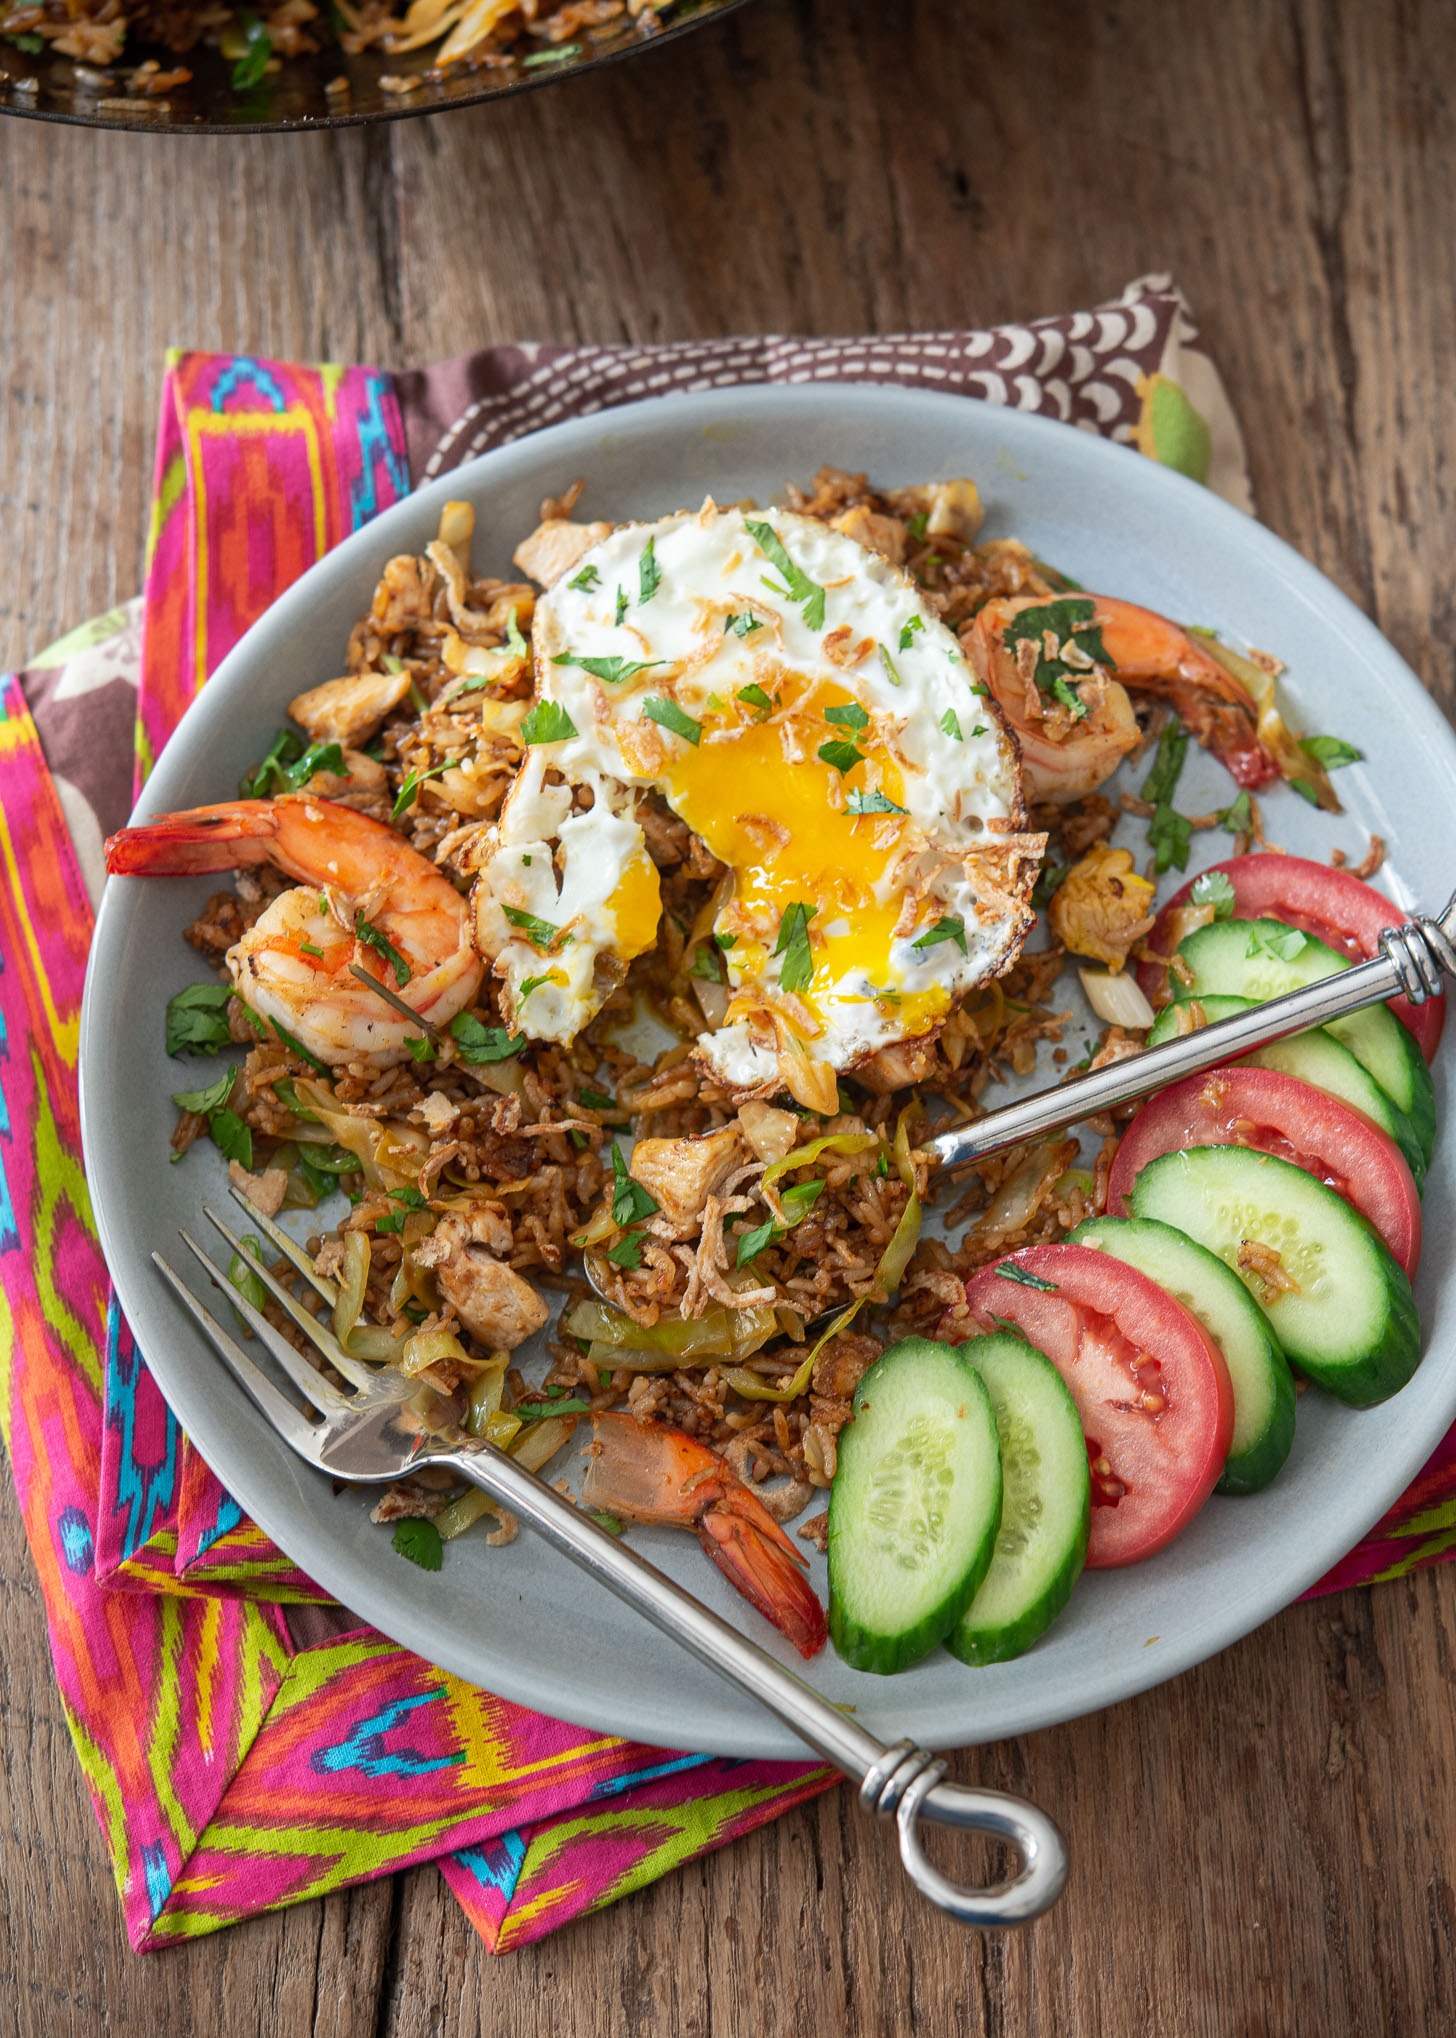 Nasi goreng is topped with a fried egg and served with cucumber and tomato.